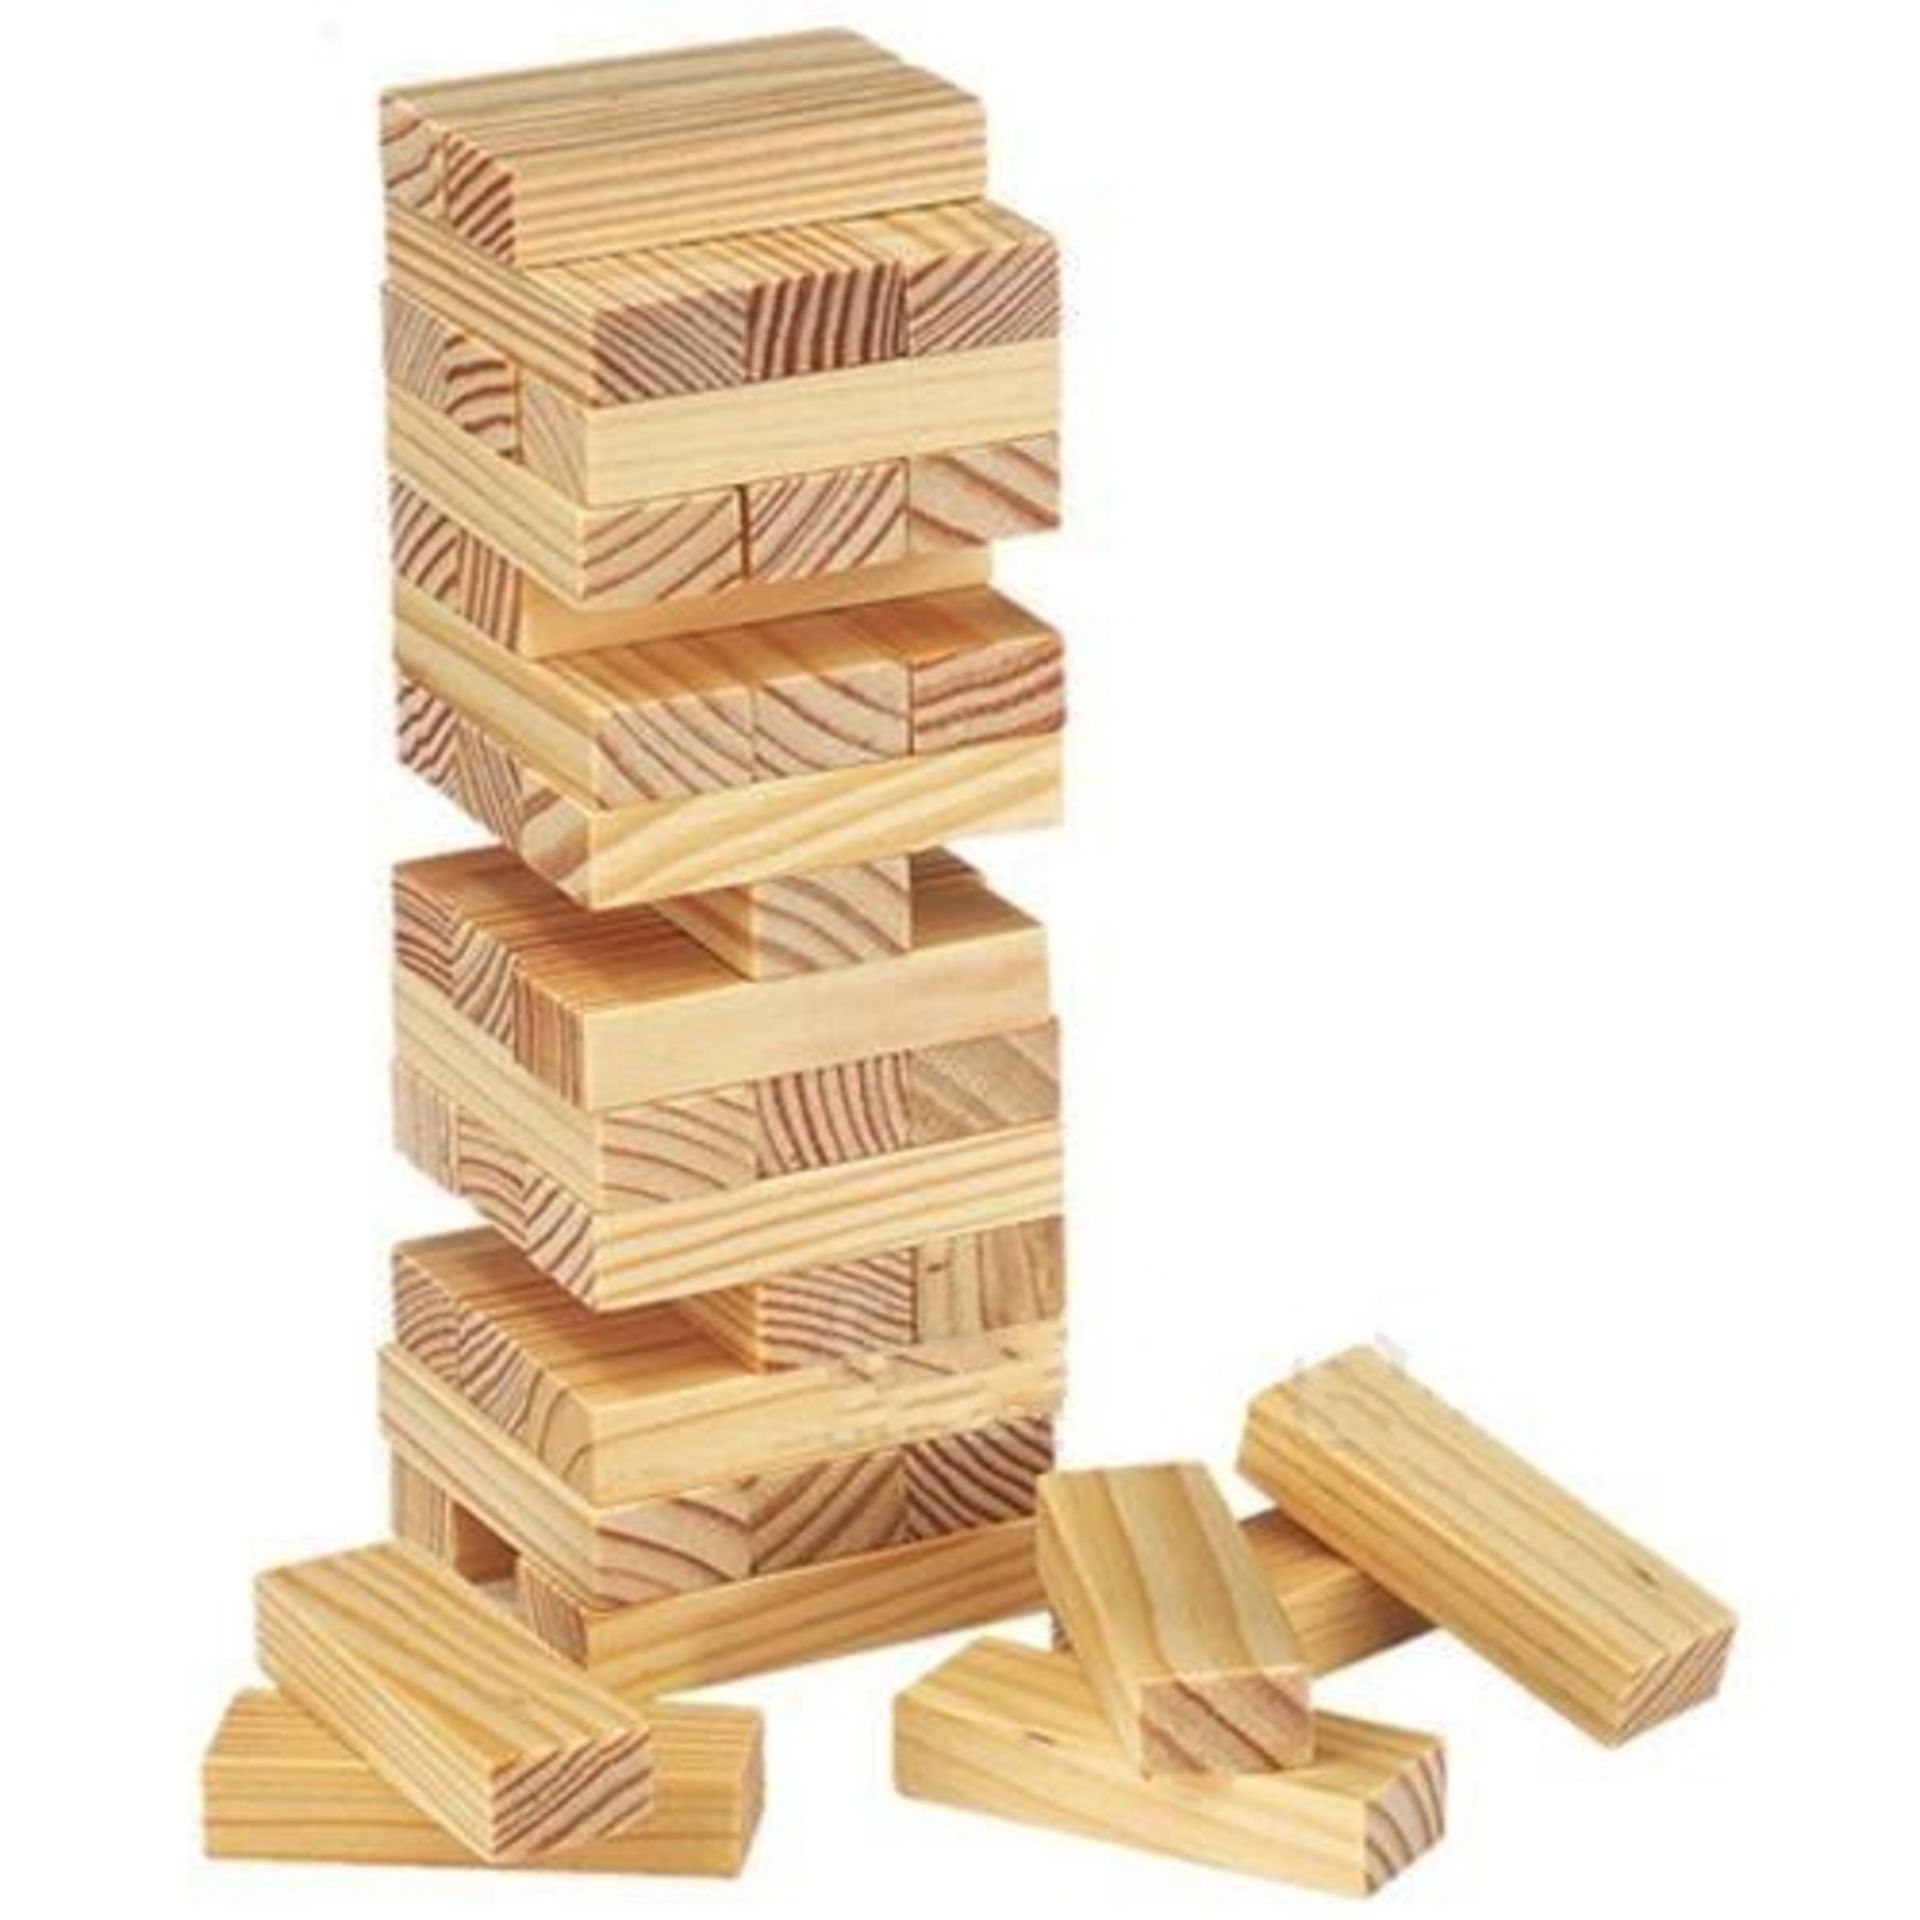 V Brand New Quality Wooden Tower Block Game X 3 Bid price to be multiplied by Three